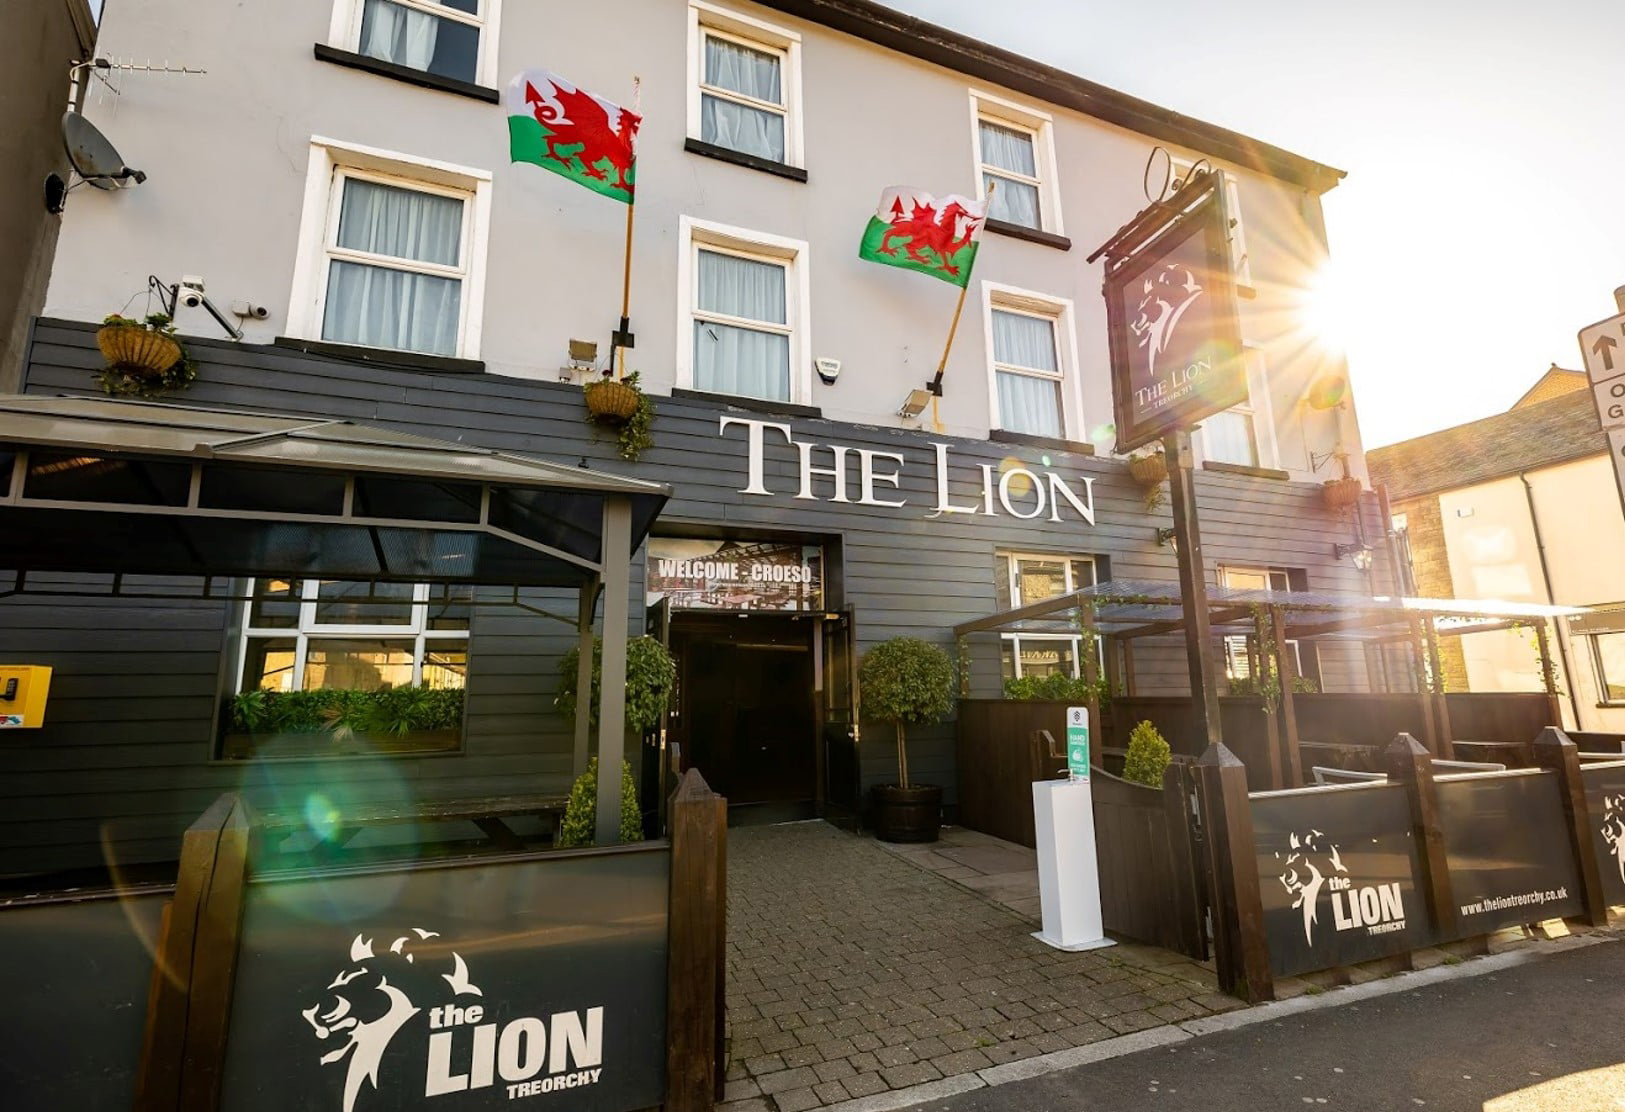 Outside The Lion